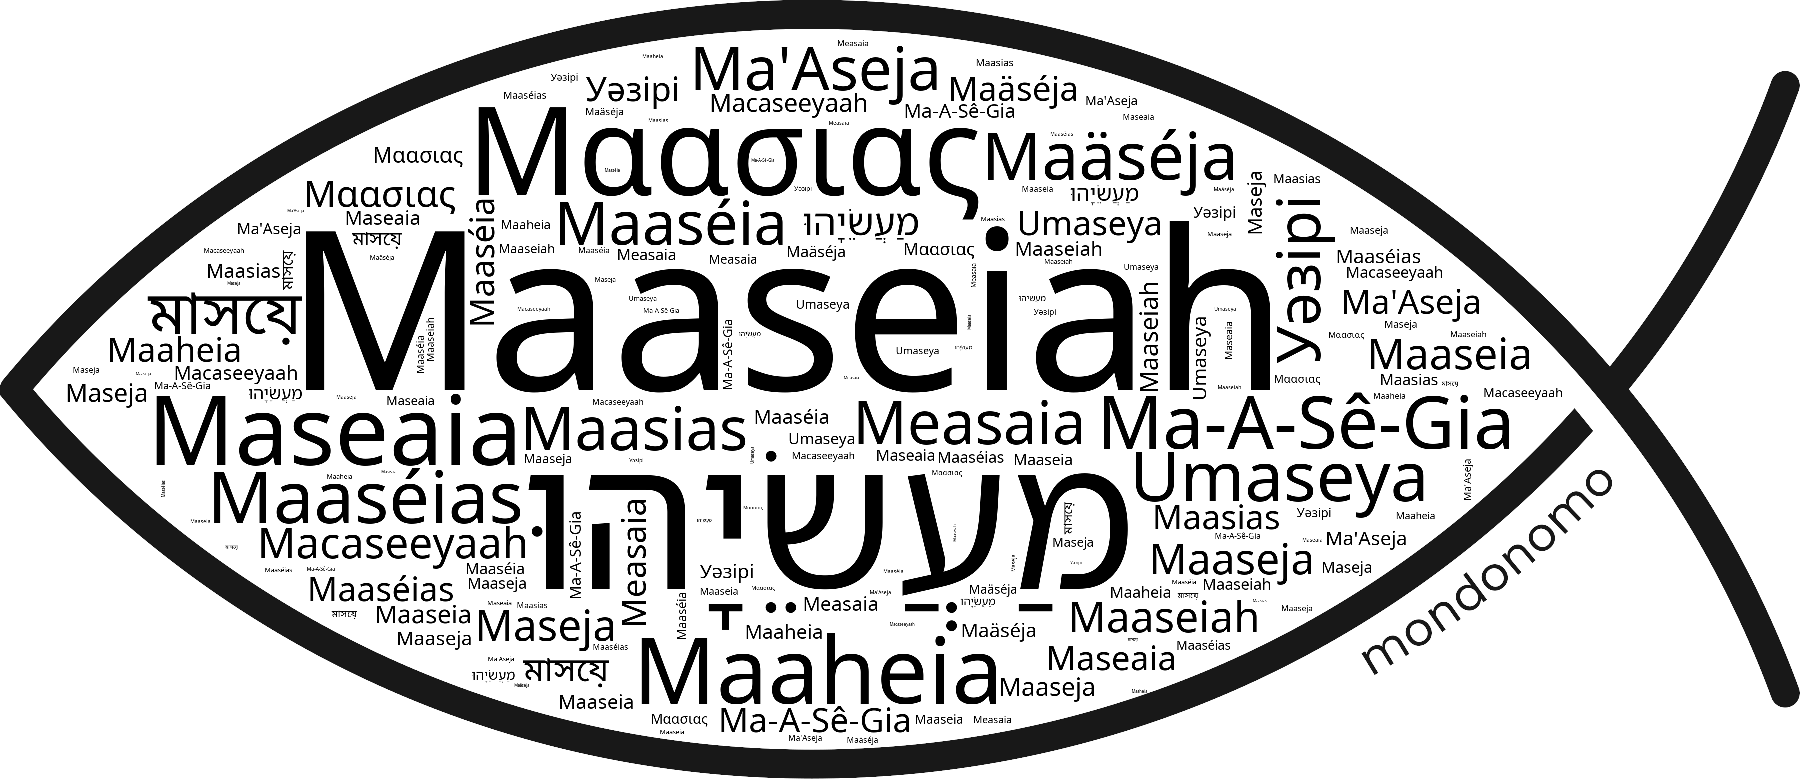 Name Maaseiah in the world's Bibles